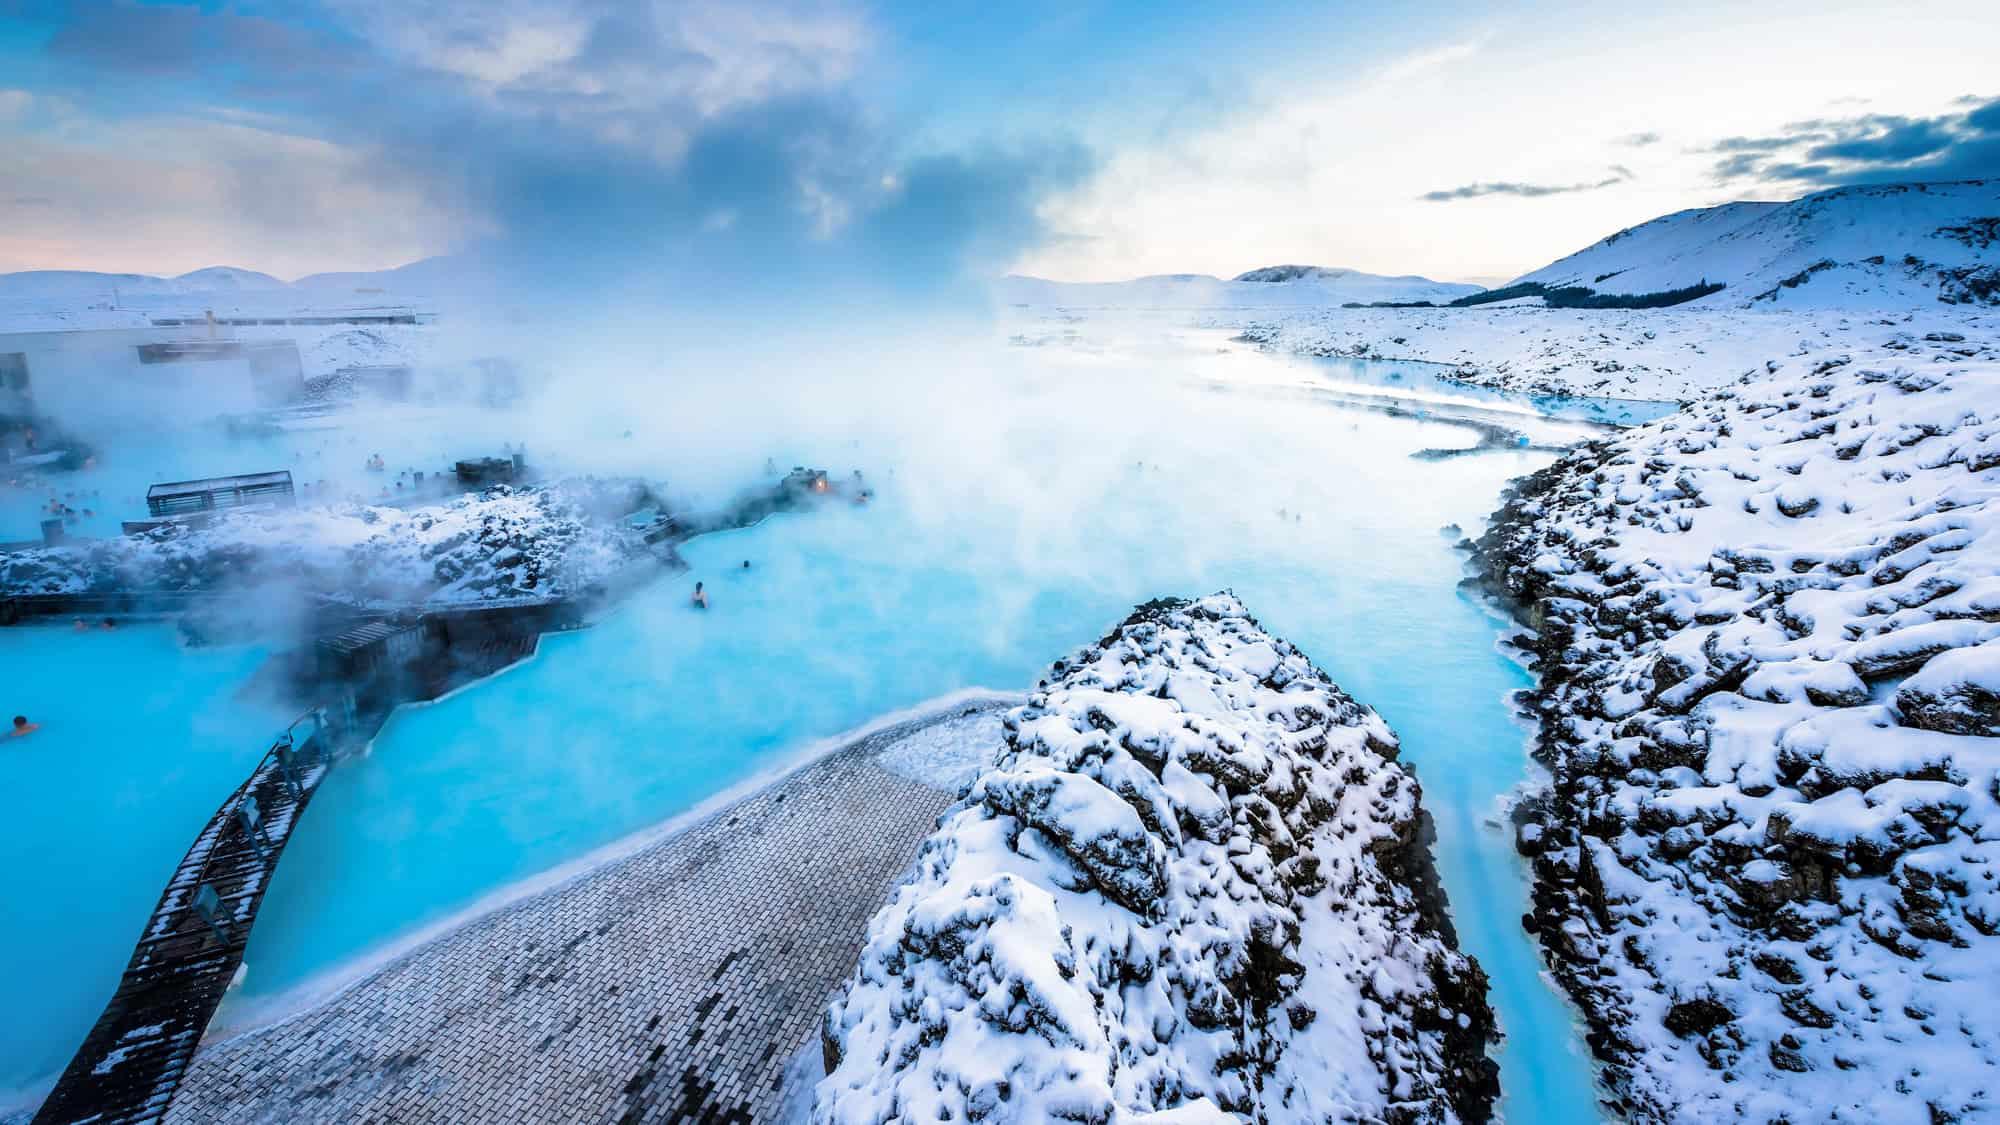 <p>Sure, it’s touristy, but come on, the Blue Lagoon is iconic for a reason. The milky-blue waters contrasting against dramatic black lava fields—HELLO, it’s a photographer’s dream. And it’s not just the visual appeal. <strong>You also get to soak in a steamy geothermal spa that feels like a luxurious hot tub</strong>. </p> <p>Seriously, who wouldn’t want to float around in this surreal paradise while pretending they’re in a high-end commercial? It’s a win-win—ultimate relaxation and enviable photos all in one go.</p> <div class="wp-block-kadence-iconlist kt-svg-icon-list-items kt-svg-icon-list-items4232_f8bb76-e8 kt-svg-icon-list-columns-1 alignnone"> <ul class="kt-svg-icon-list"> <li class="wp-block-kadence-listitem kt-svg-icon-list-item-wrap kt-svg-icon-list-item-4232_4dcaa8-5d"><span><strong>Best time to visit</strong>: Late afternoon, when the steam creates an ethereal atmosphere.</span></li> </ul> </div>